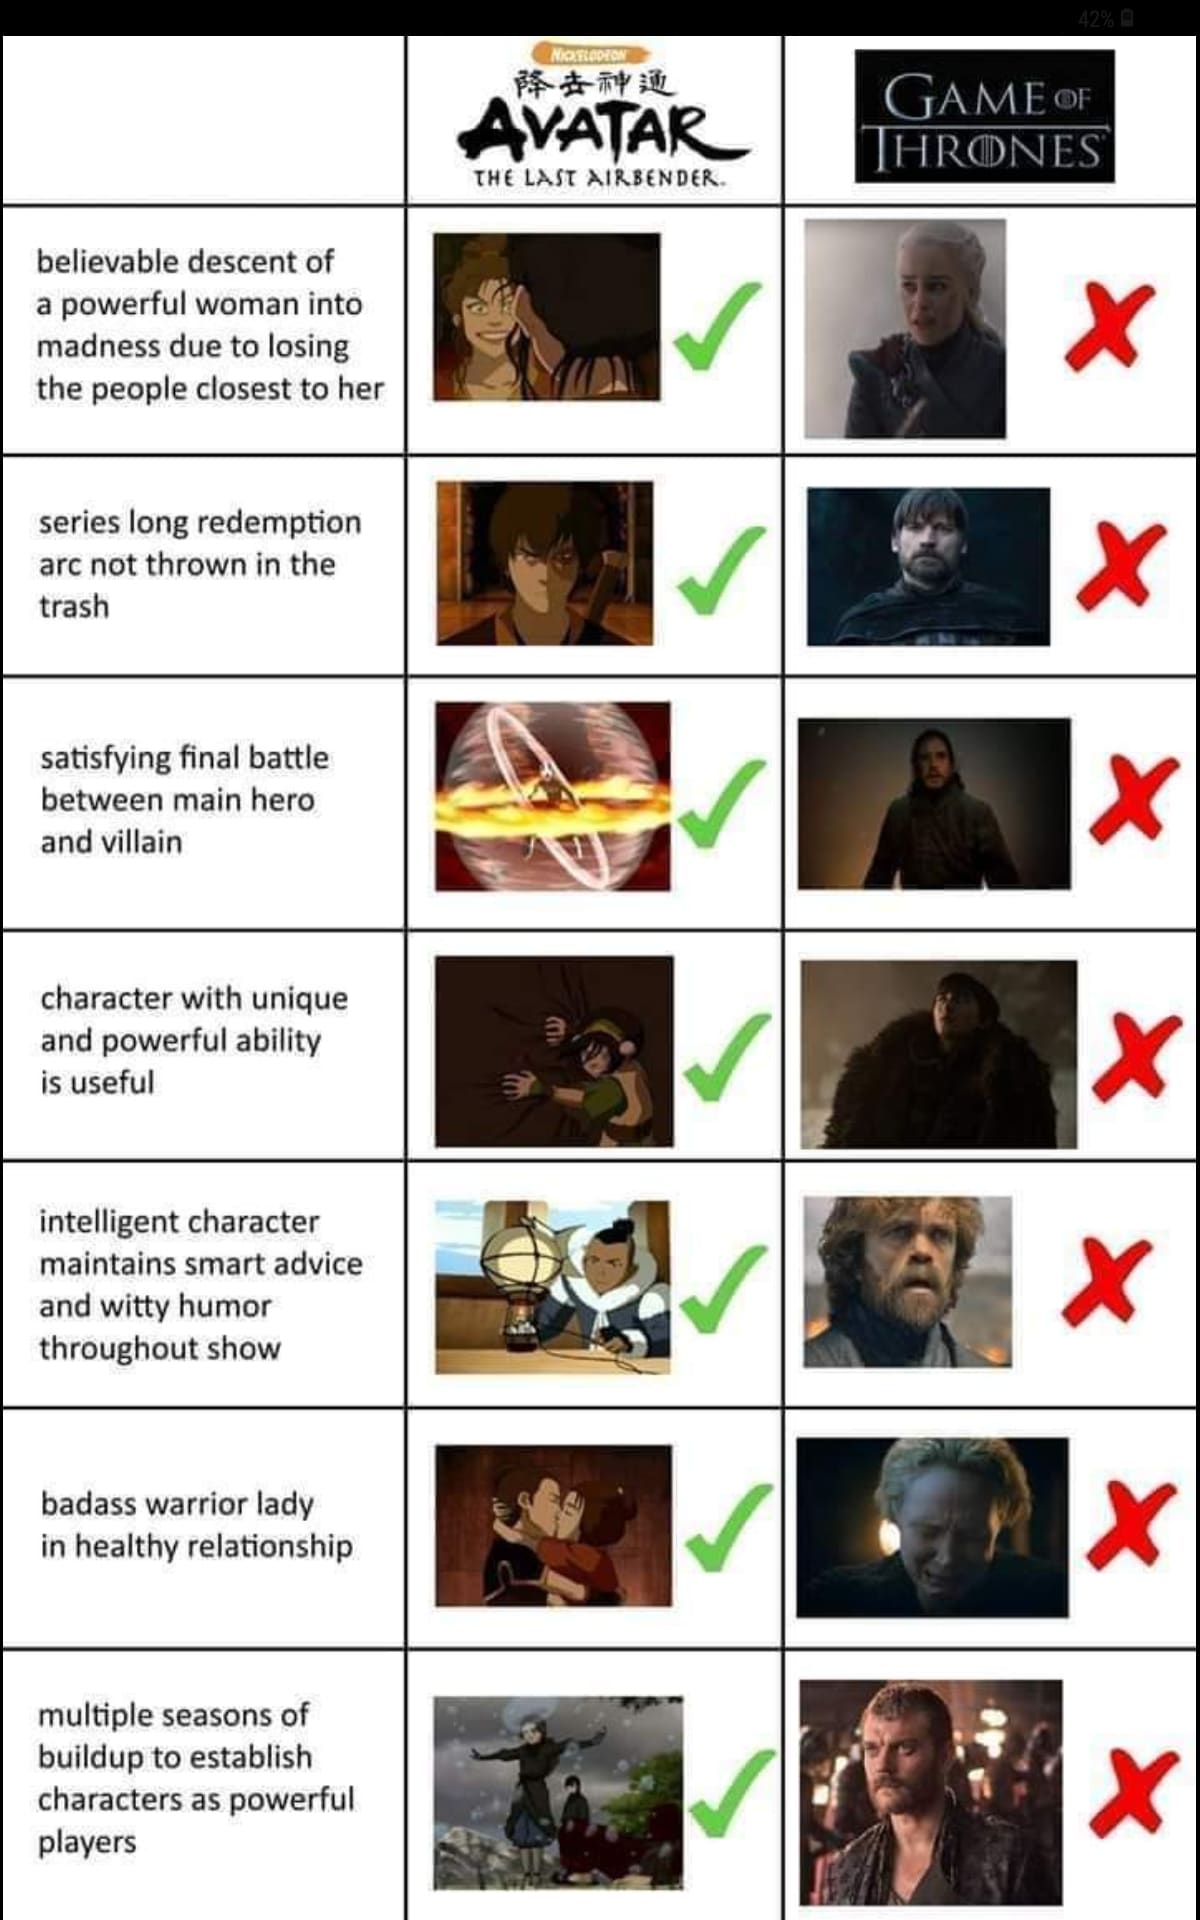 Game of thrones, ATLA, Avatar, Zuko, Aang, Tyrion Game of thrones memes Game of thrones, ATLA, Avatar, Zuko, Aang, Tyrion text: GAME or H RON ES THE LAST believable descent of a powerful woman into madness due to losing the people closest to her series long redemption arc not thrown in the trash satisfying final battle between main hero and villain character with unique and powerful ability is useful intelligent character maintains smart advice and witty humor throughout show badass warrior lady in healthy relationship multiple seasons of buildup to establish characters as powerful players 